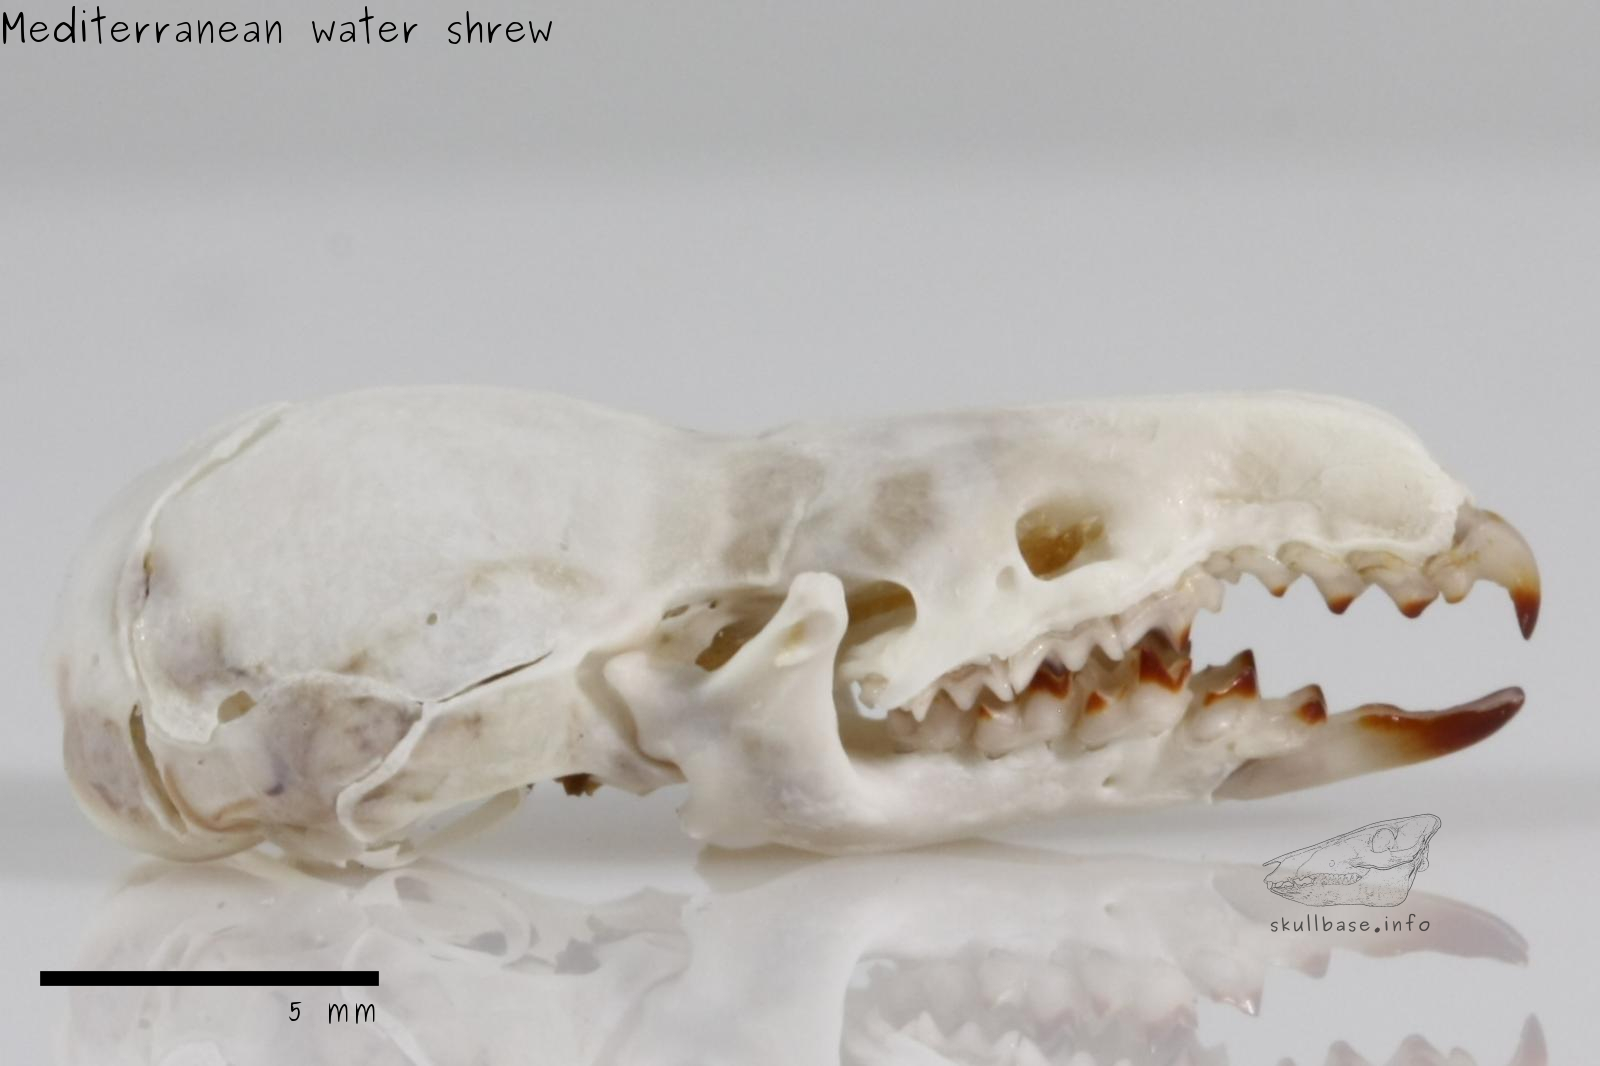 Mediterranean water shrew (Neomys anomalus) skull lateral view